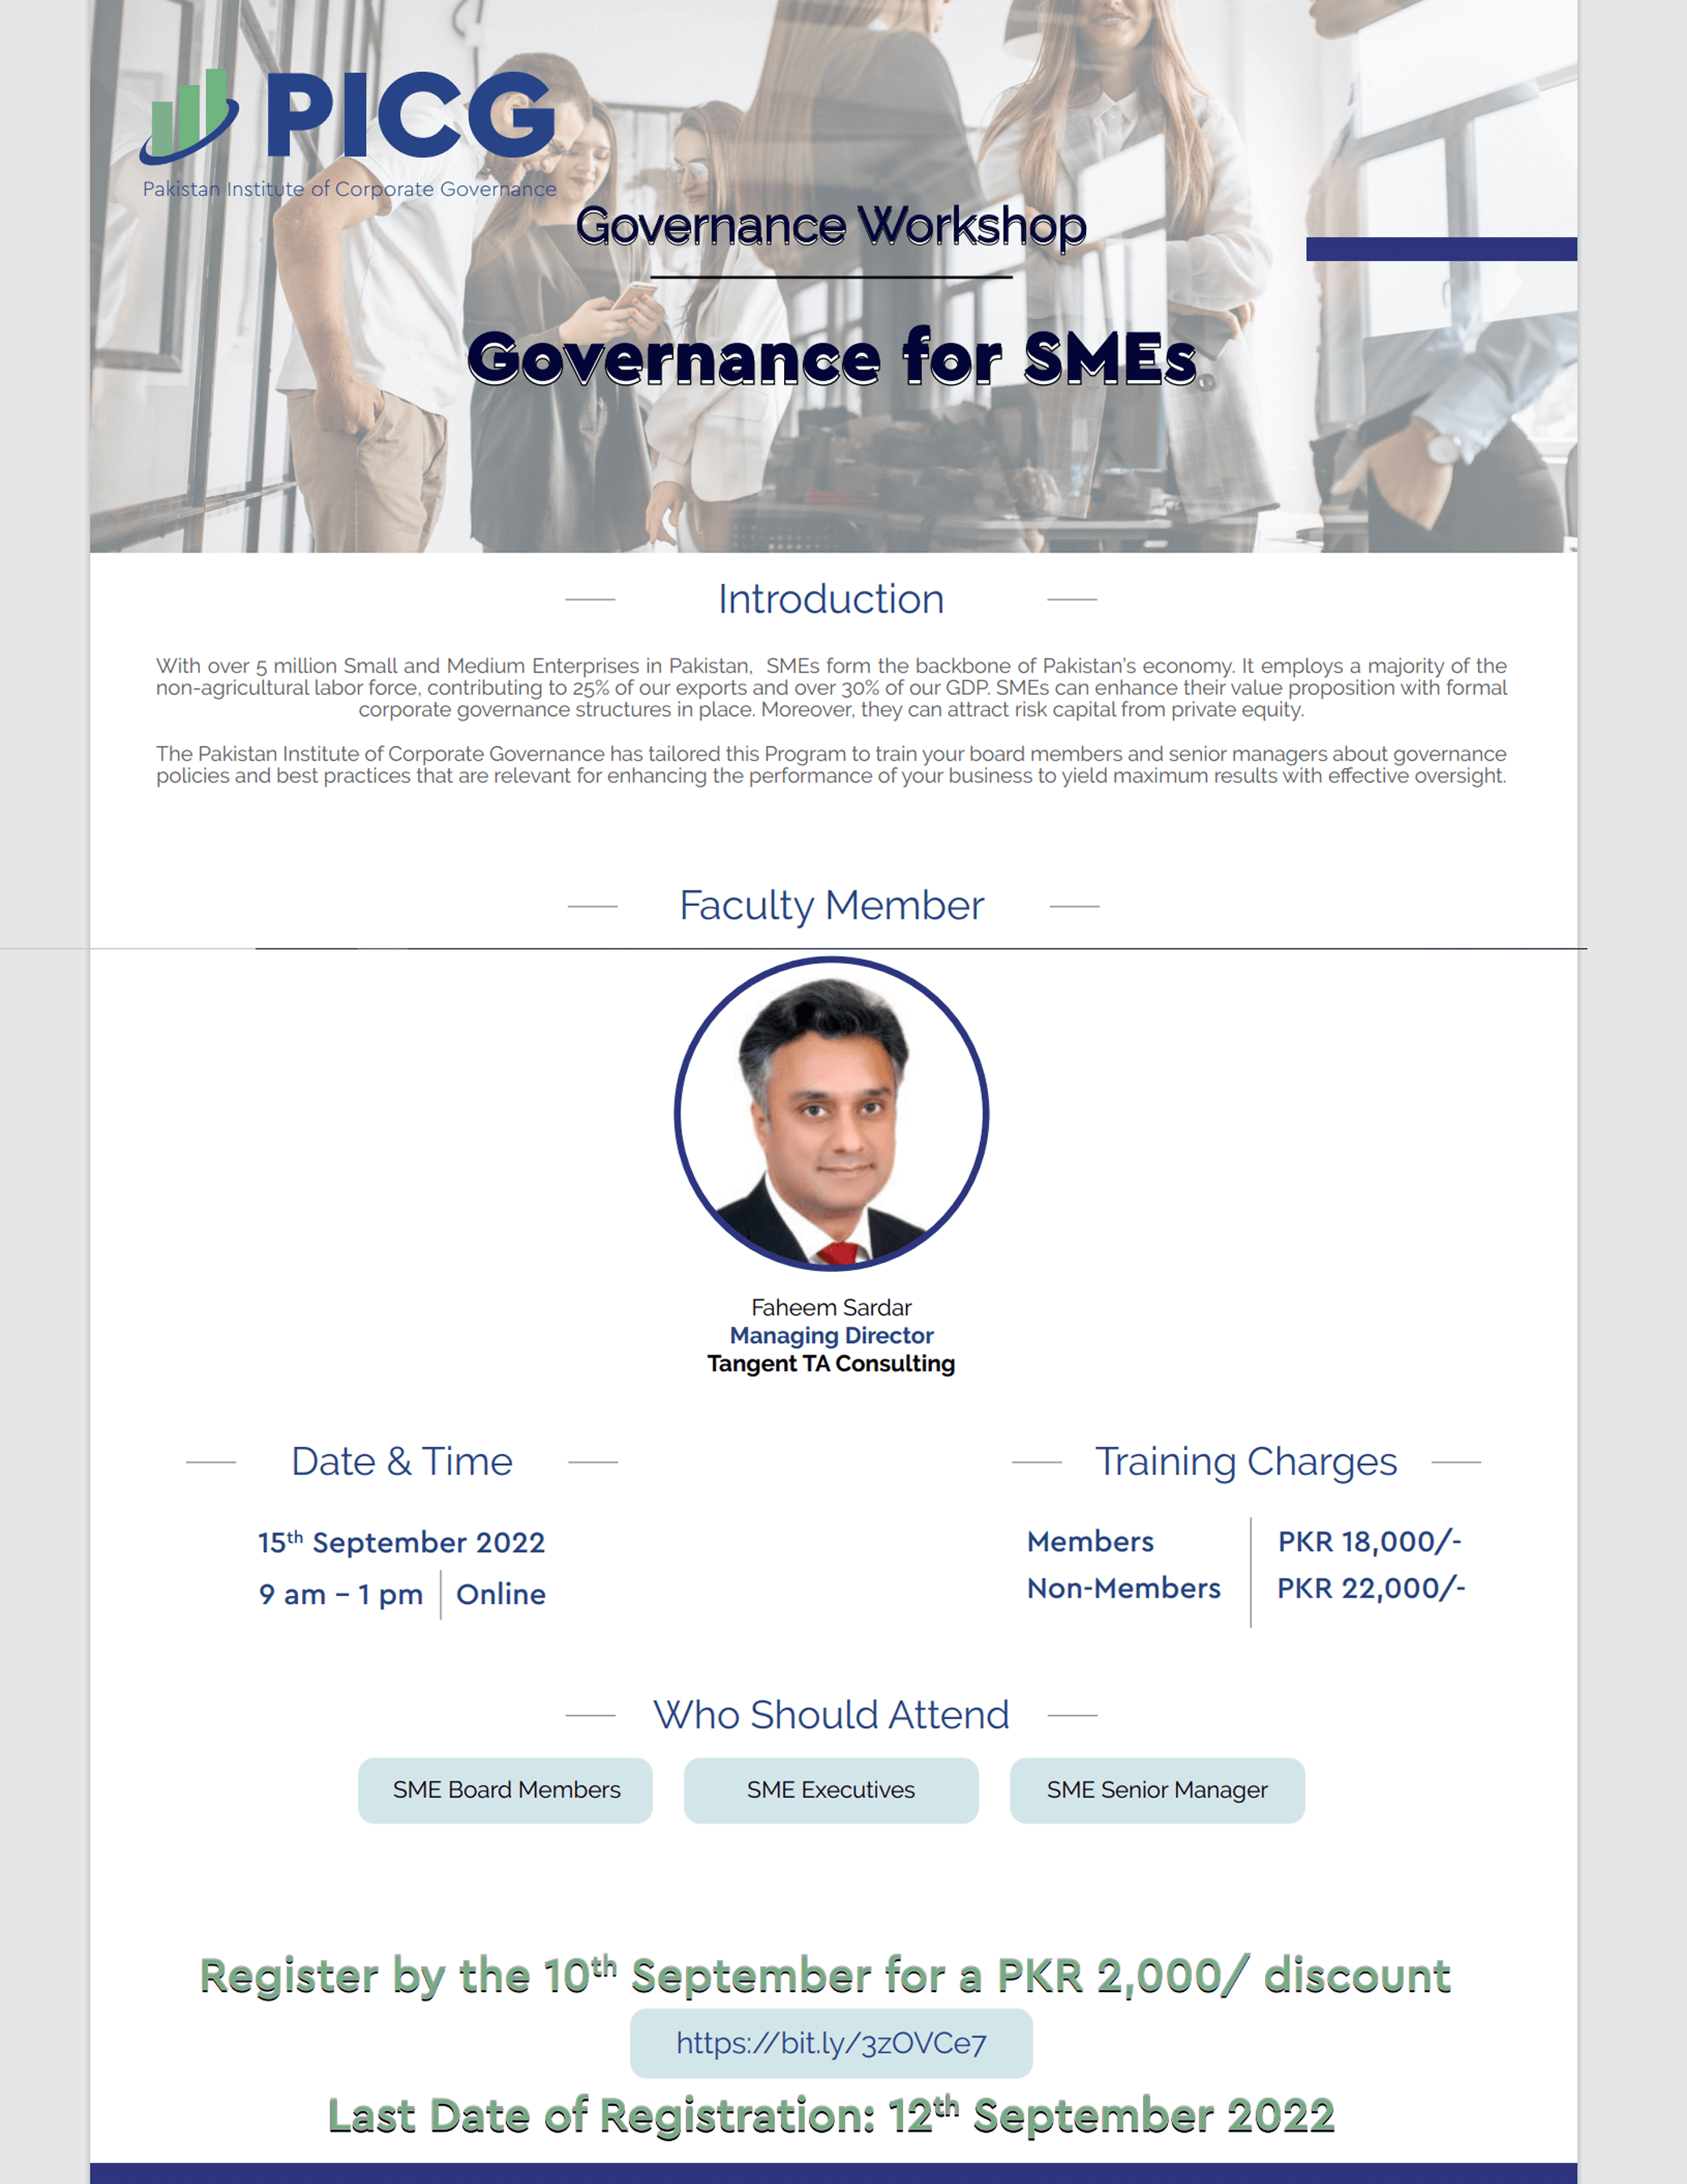 The PICG presents Governance for SMEs